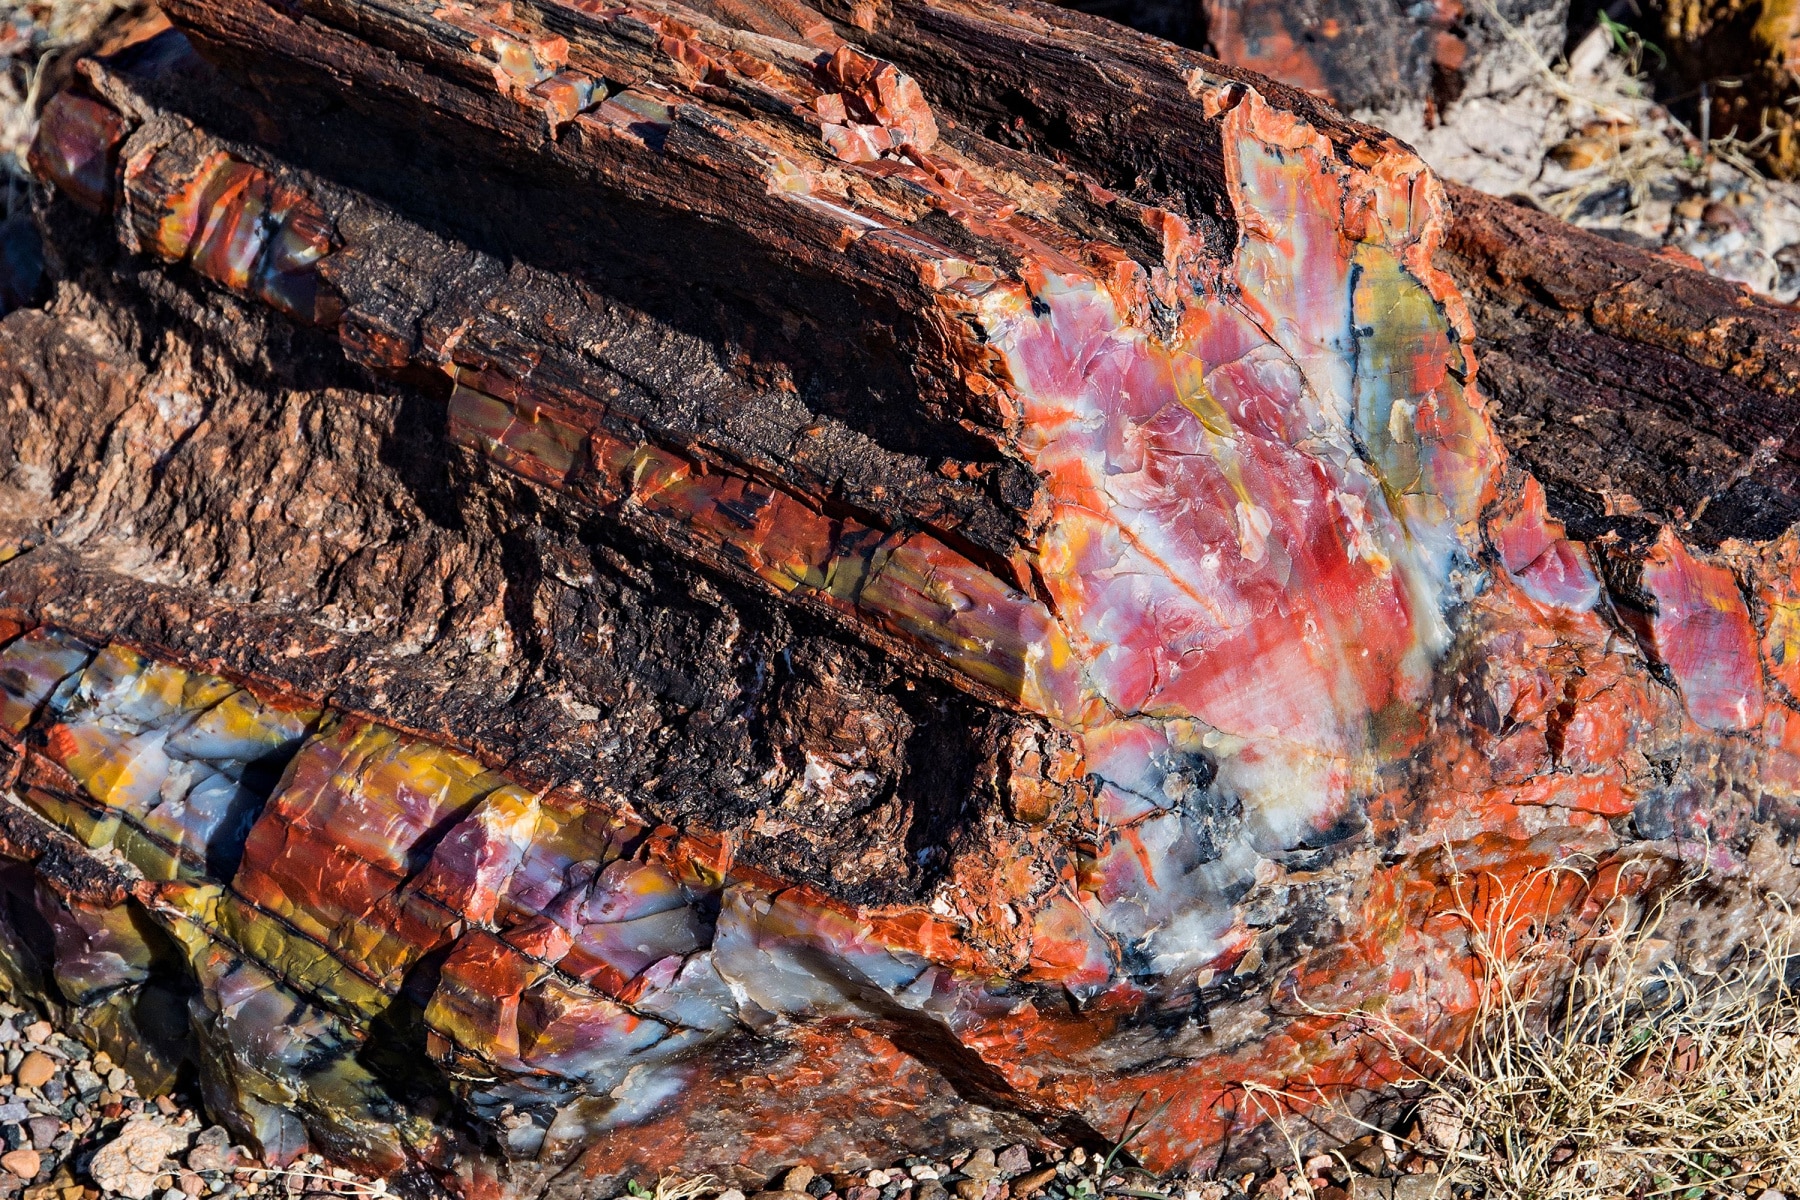 An up close look at petrified wood with dazzling mineral colors inside.